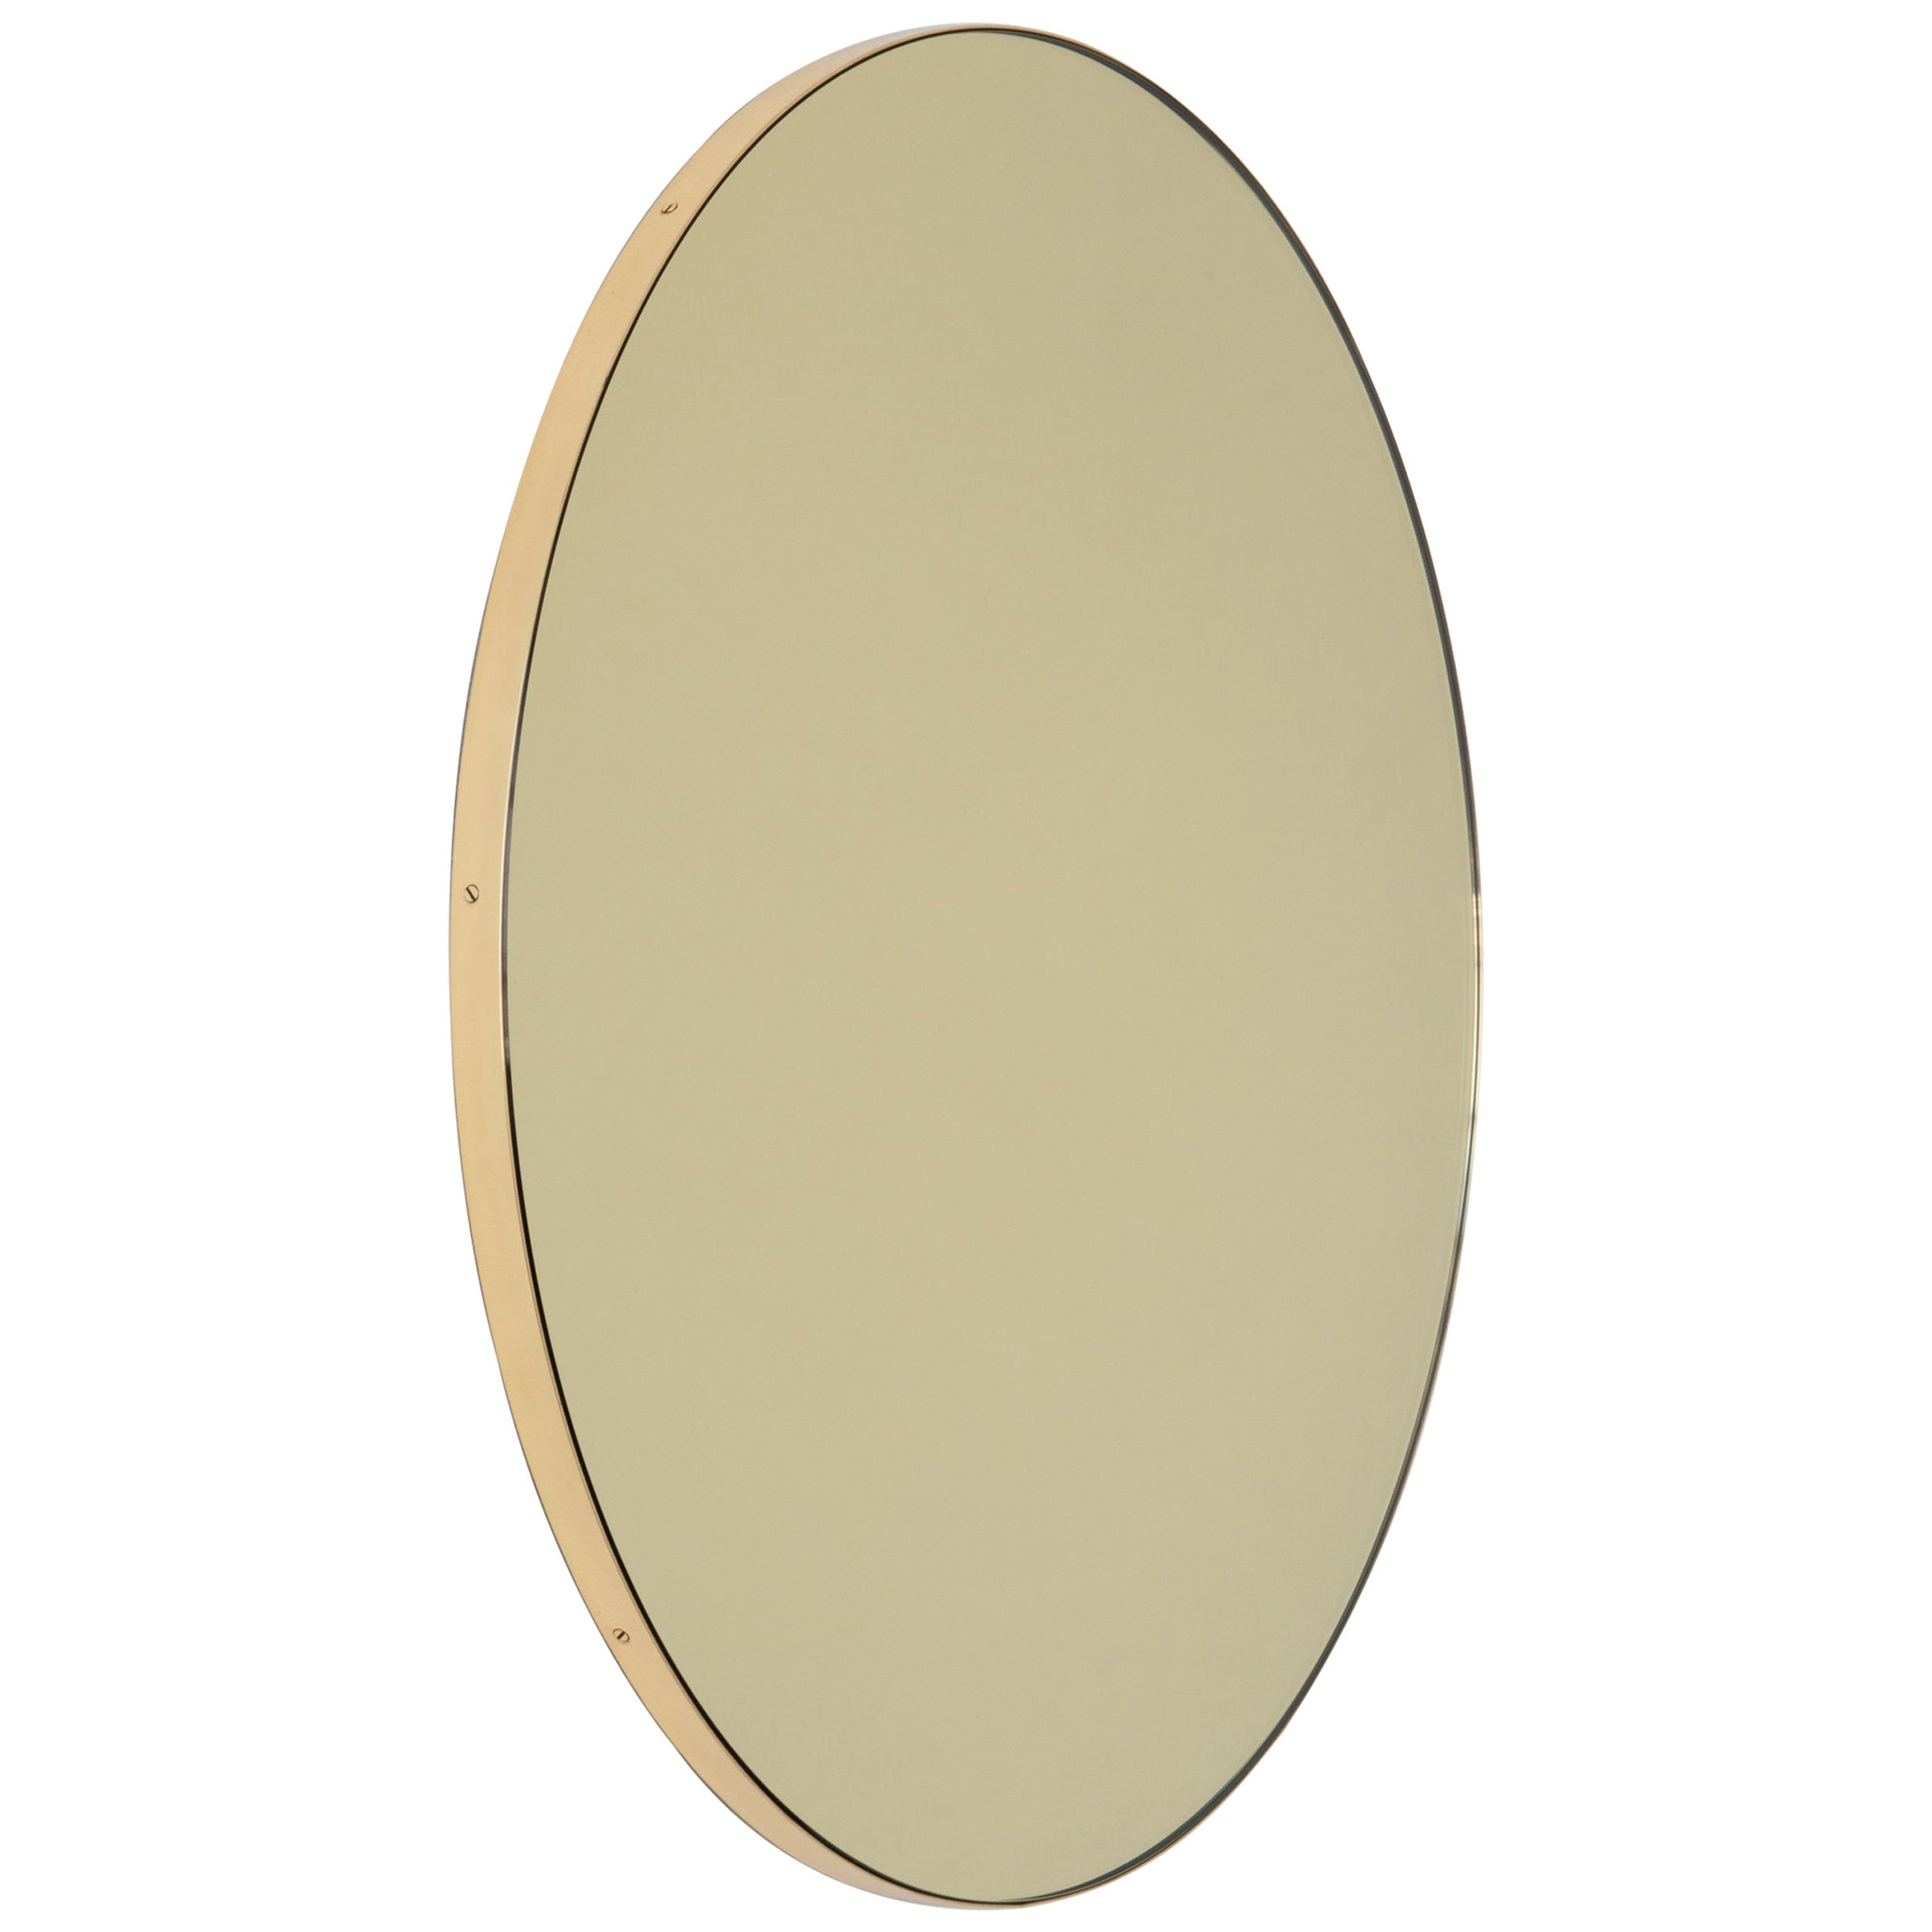 Orbis Gold Tinted Round Modern Mirror with Brushed Brass Frame, Large